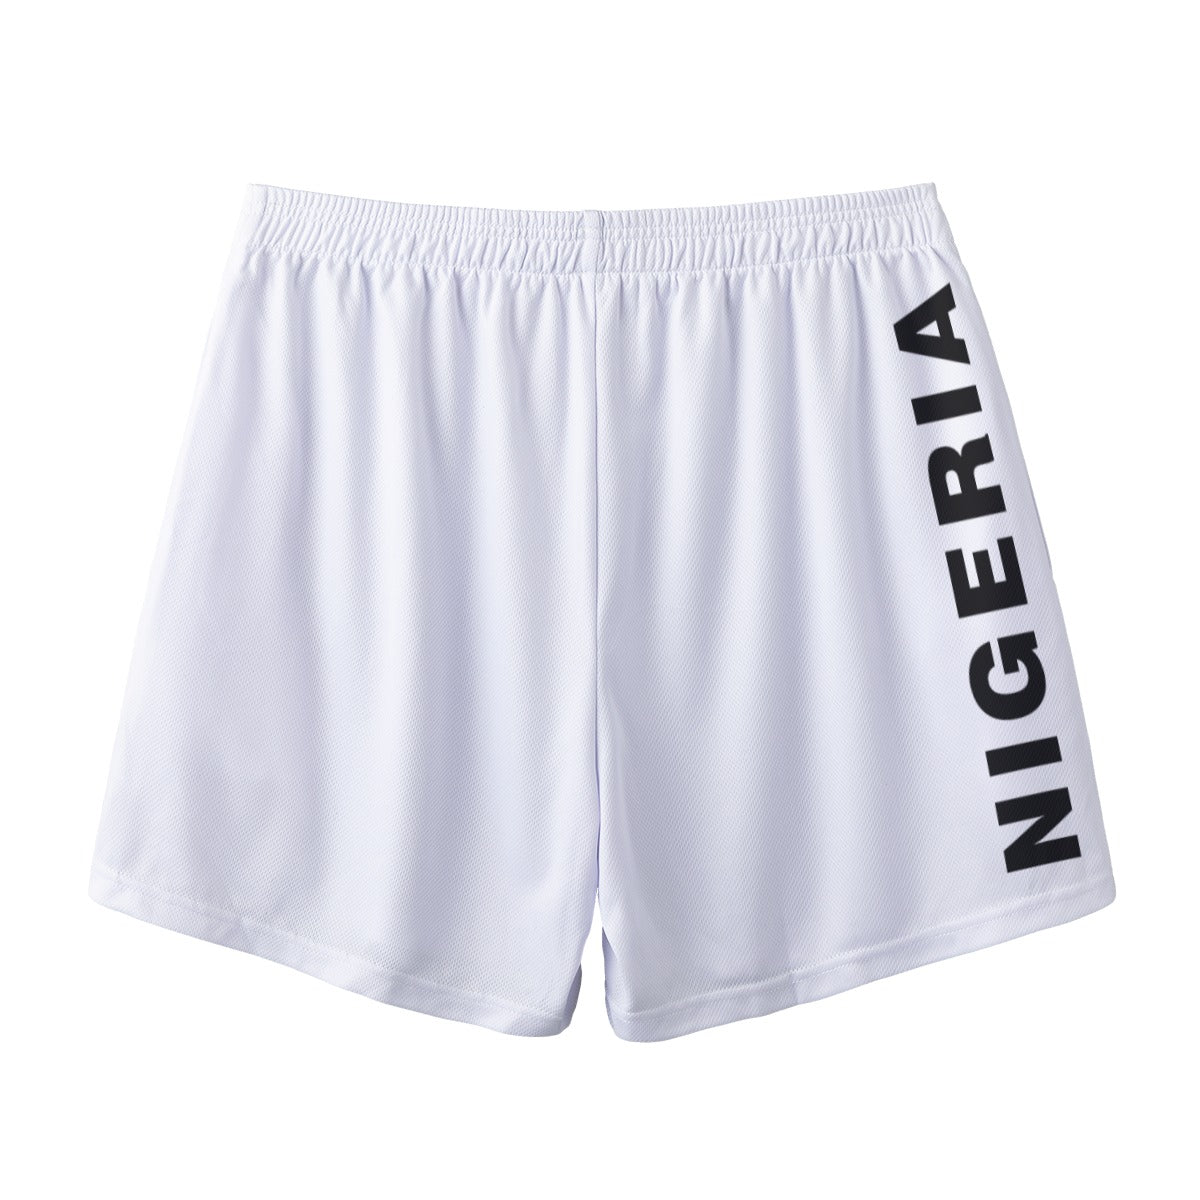 Africa Top Team Nigeria White Men's Shorts with Pocket